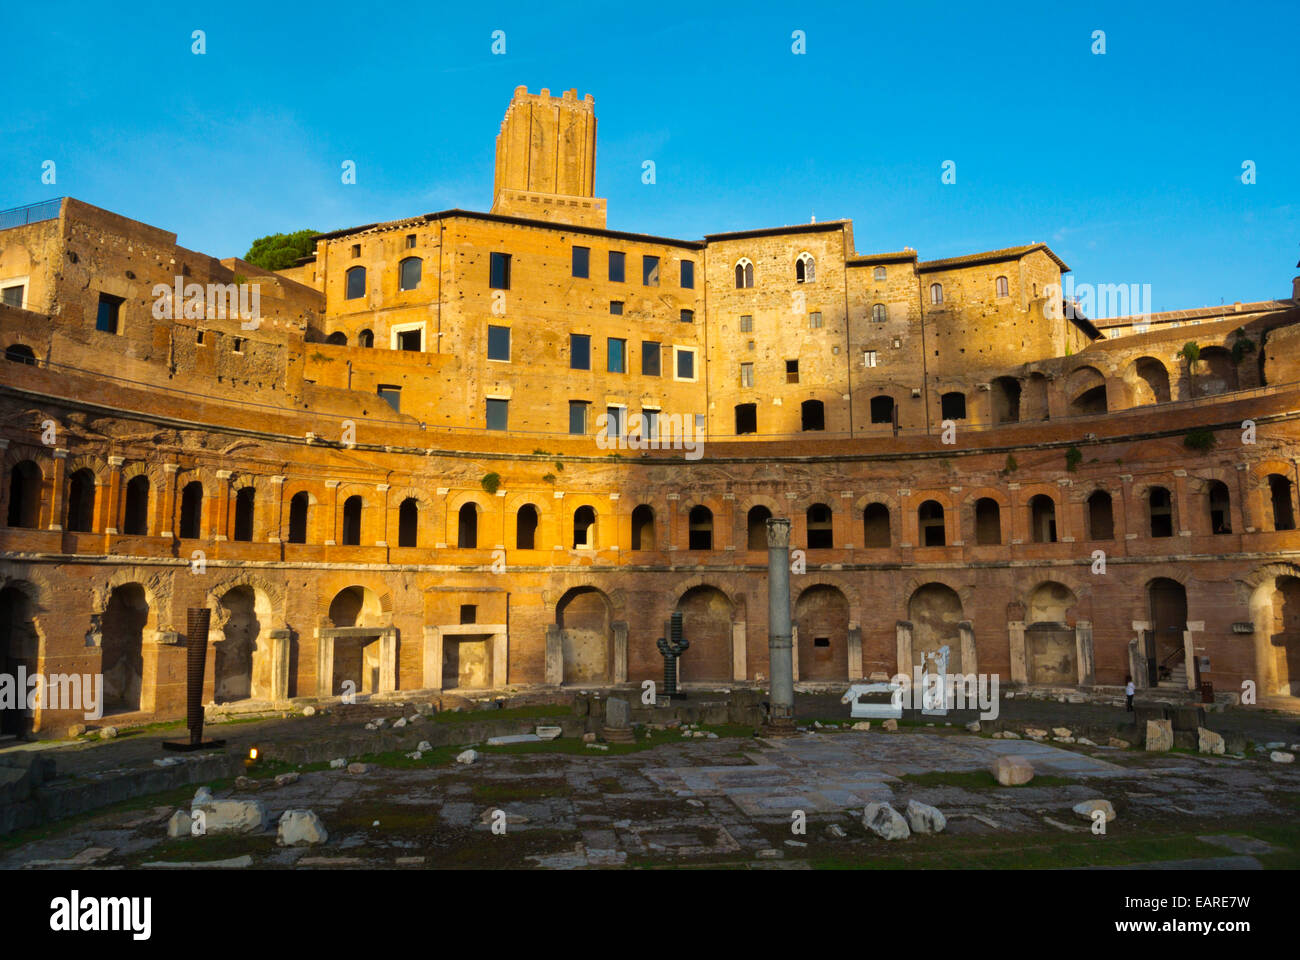 Ancient market place, with medieval residential buildings in the back, Foro di Traiano, Forum Traiani, Trajan's Forum, Rome Stock Photo